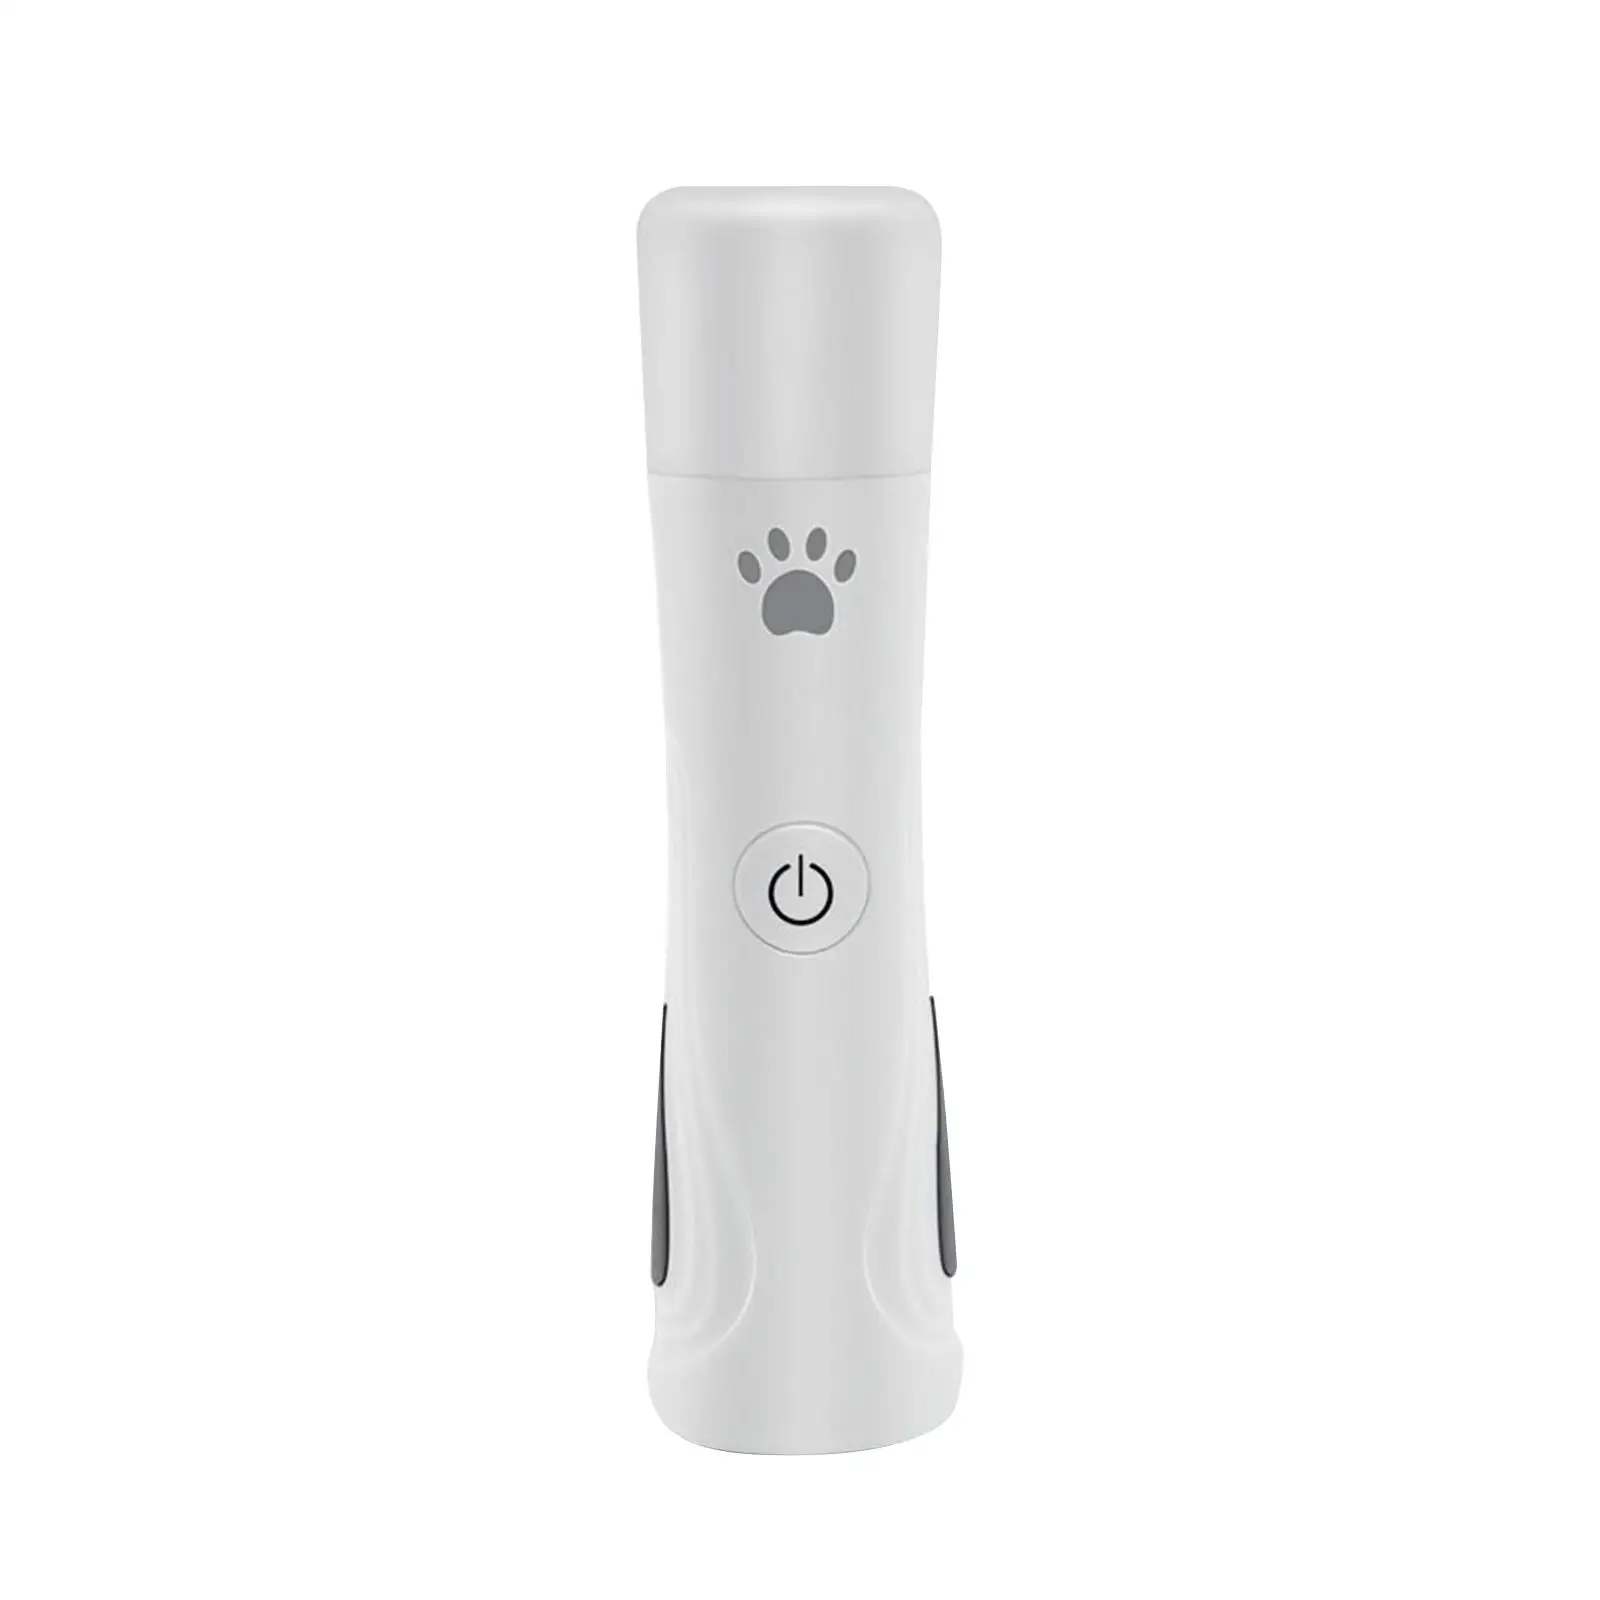 Pet Nail Grinder USB Rechargeable 3 Speeds Quiet Painless Dog Cat Nail Grinder Nail Polish for Small Medium Large Dogs and Cats